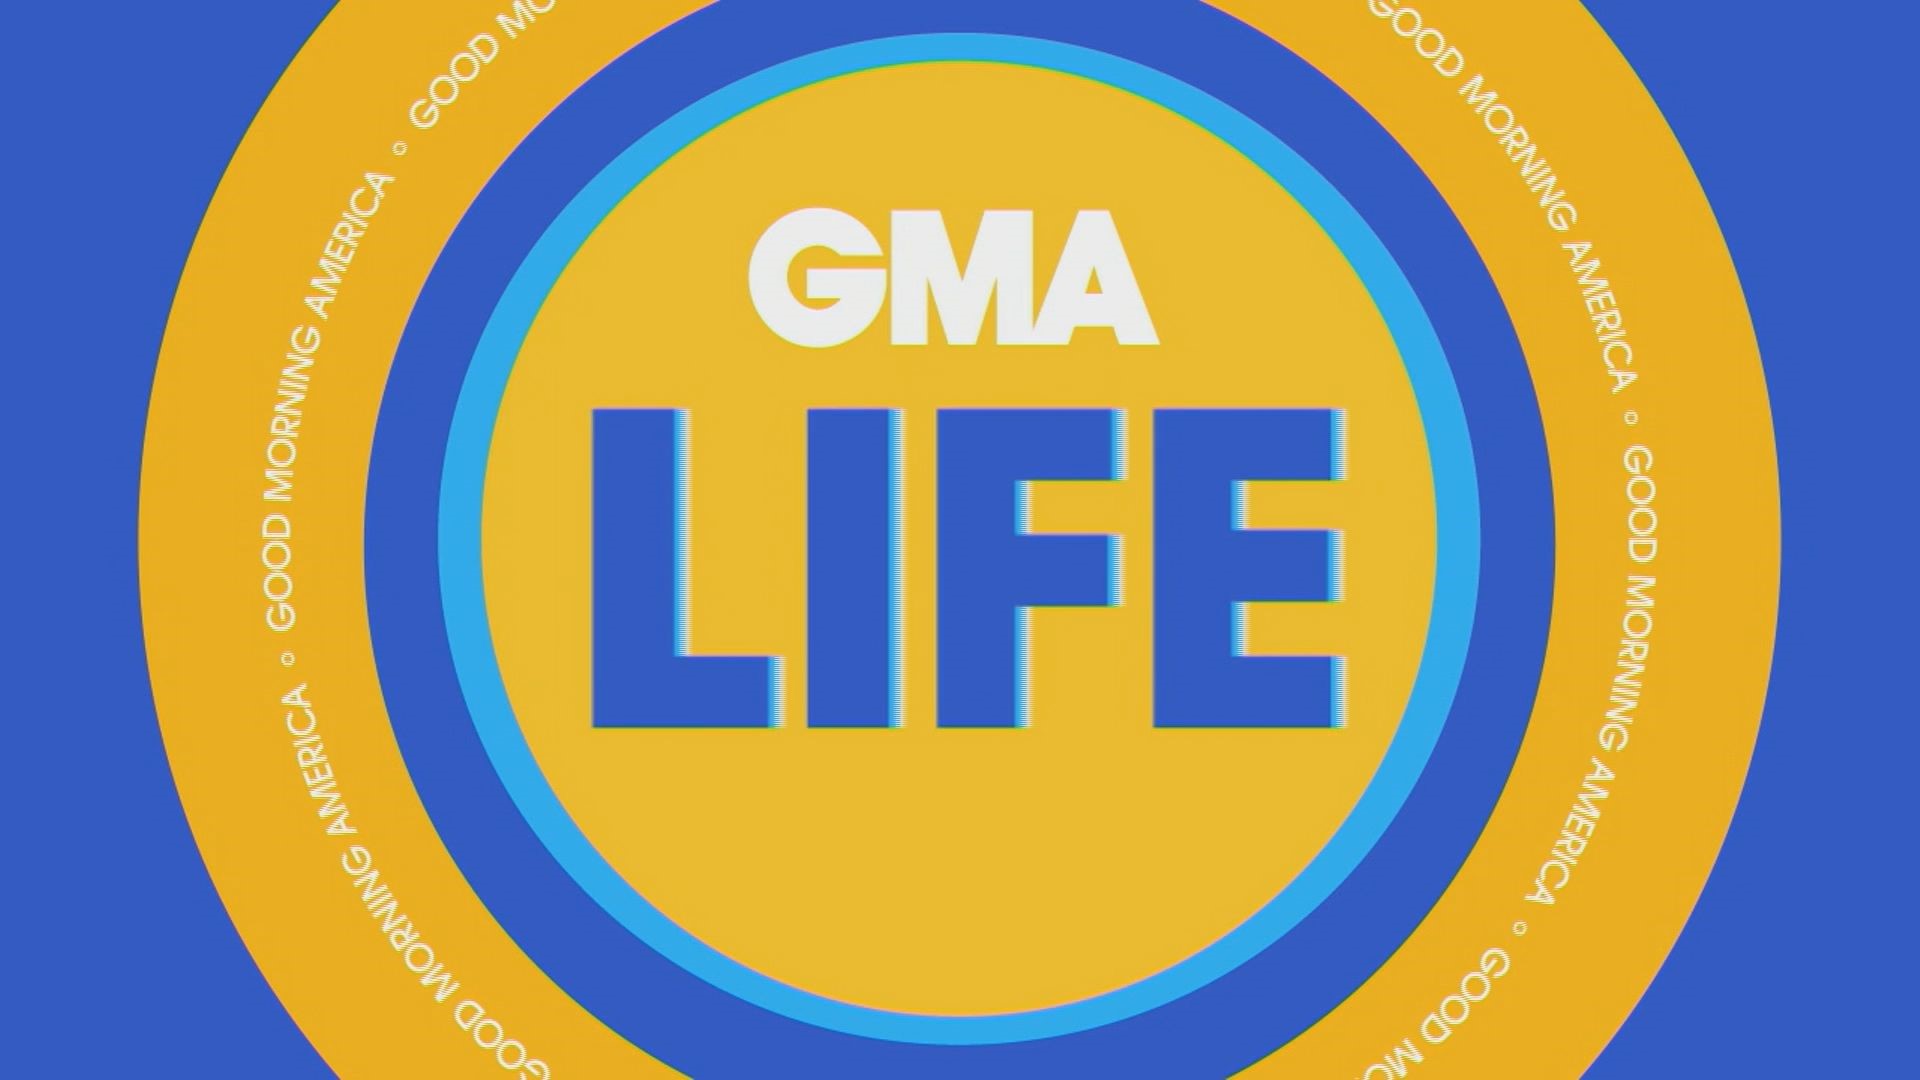 This week on GMA Life: coverage of the coronation of King Charles, deals for Mother’s Day, and an interview with Yara Shahidi.